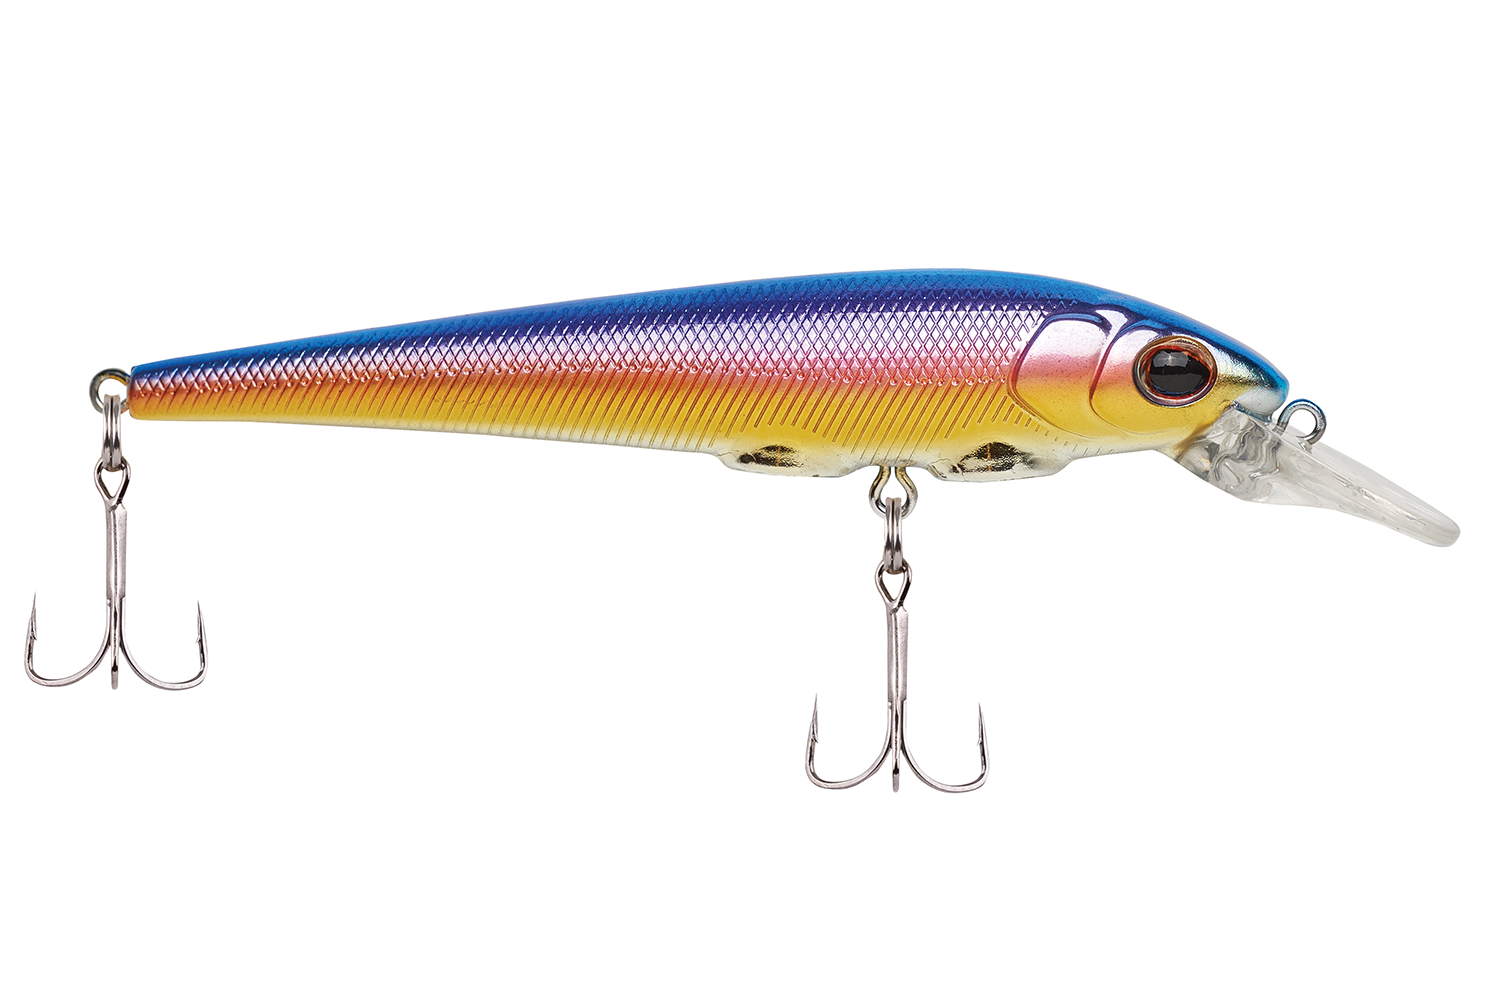  Yum Dinger Classic Worm All-Purpose Soft Plastic Bass  Fishing Lure 100 Pack